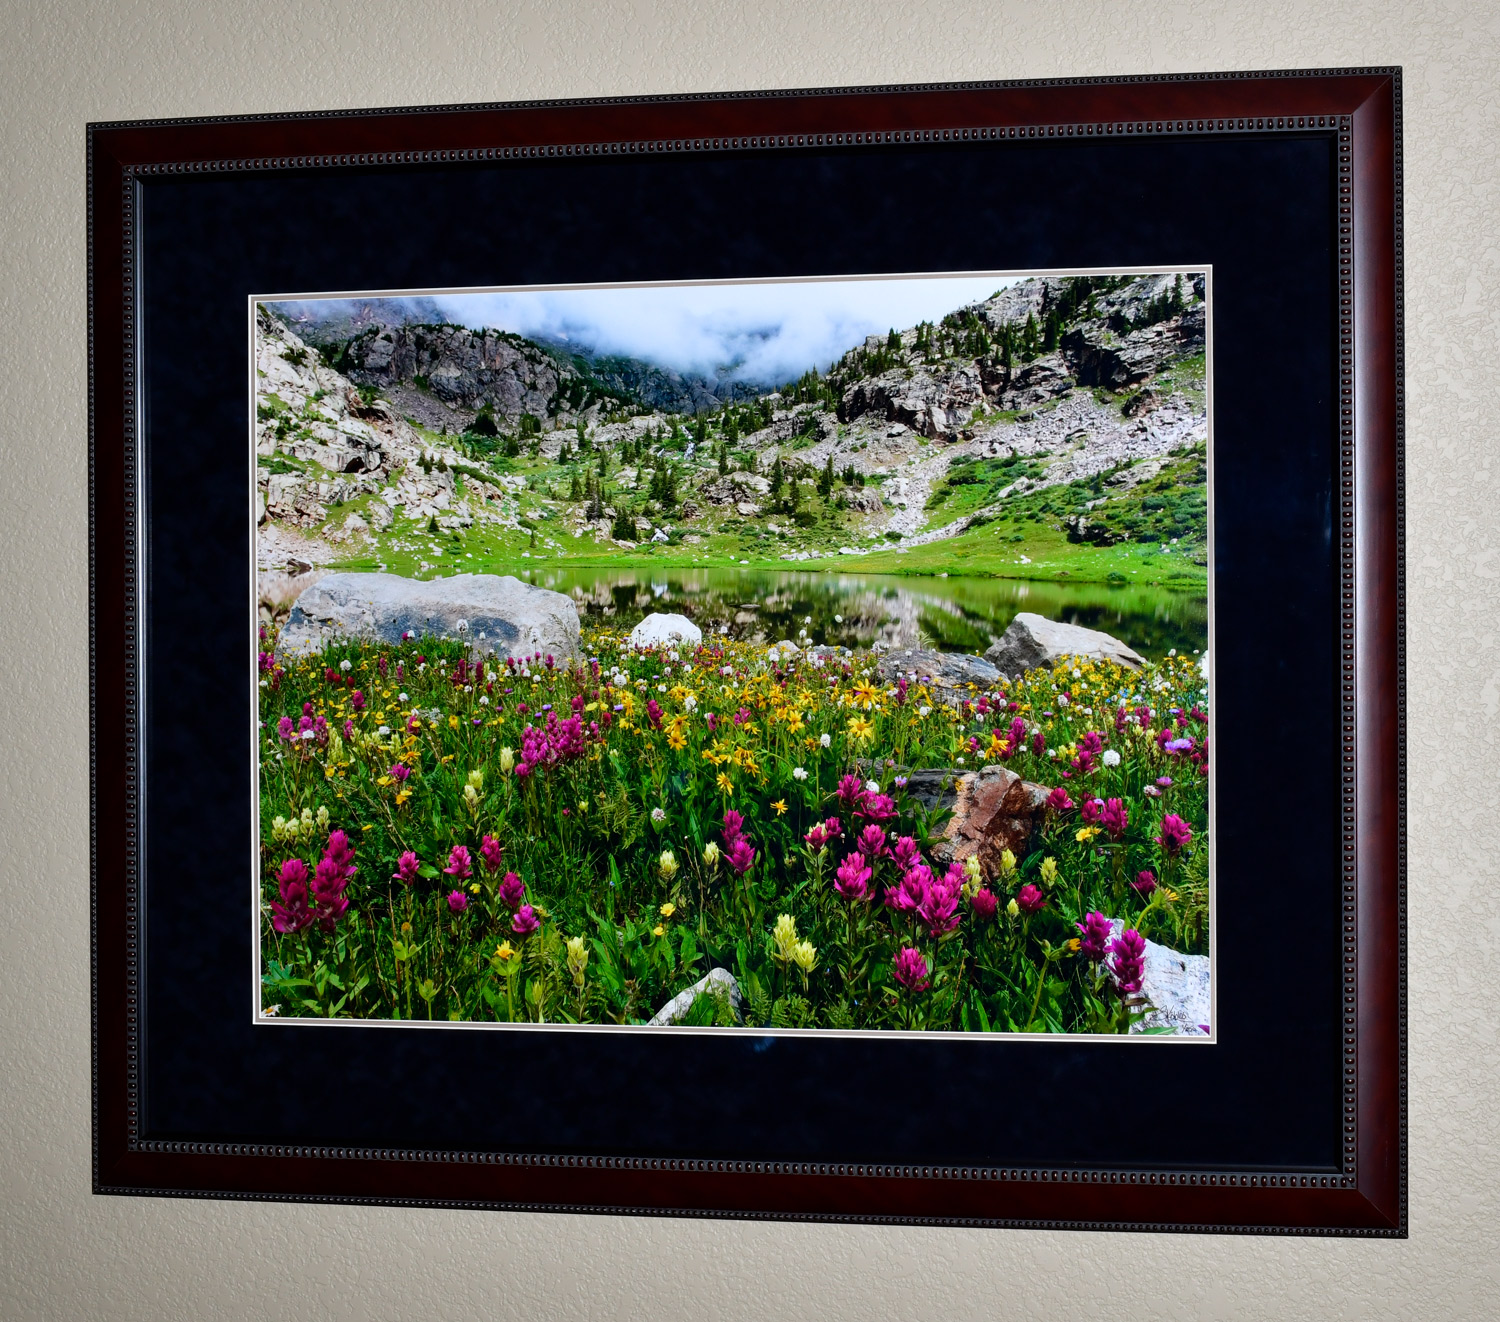 The photo dimensions are 24"x32". The frame dimensions are 36"x44".